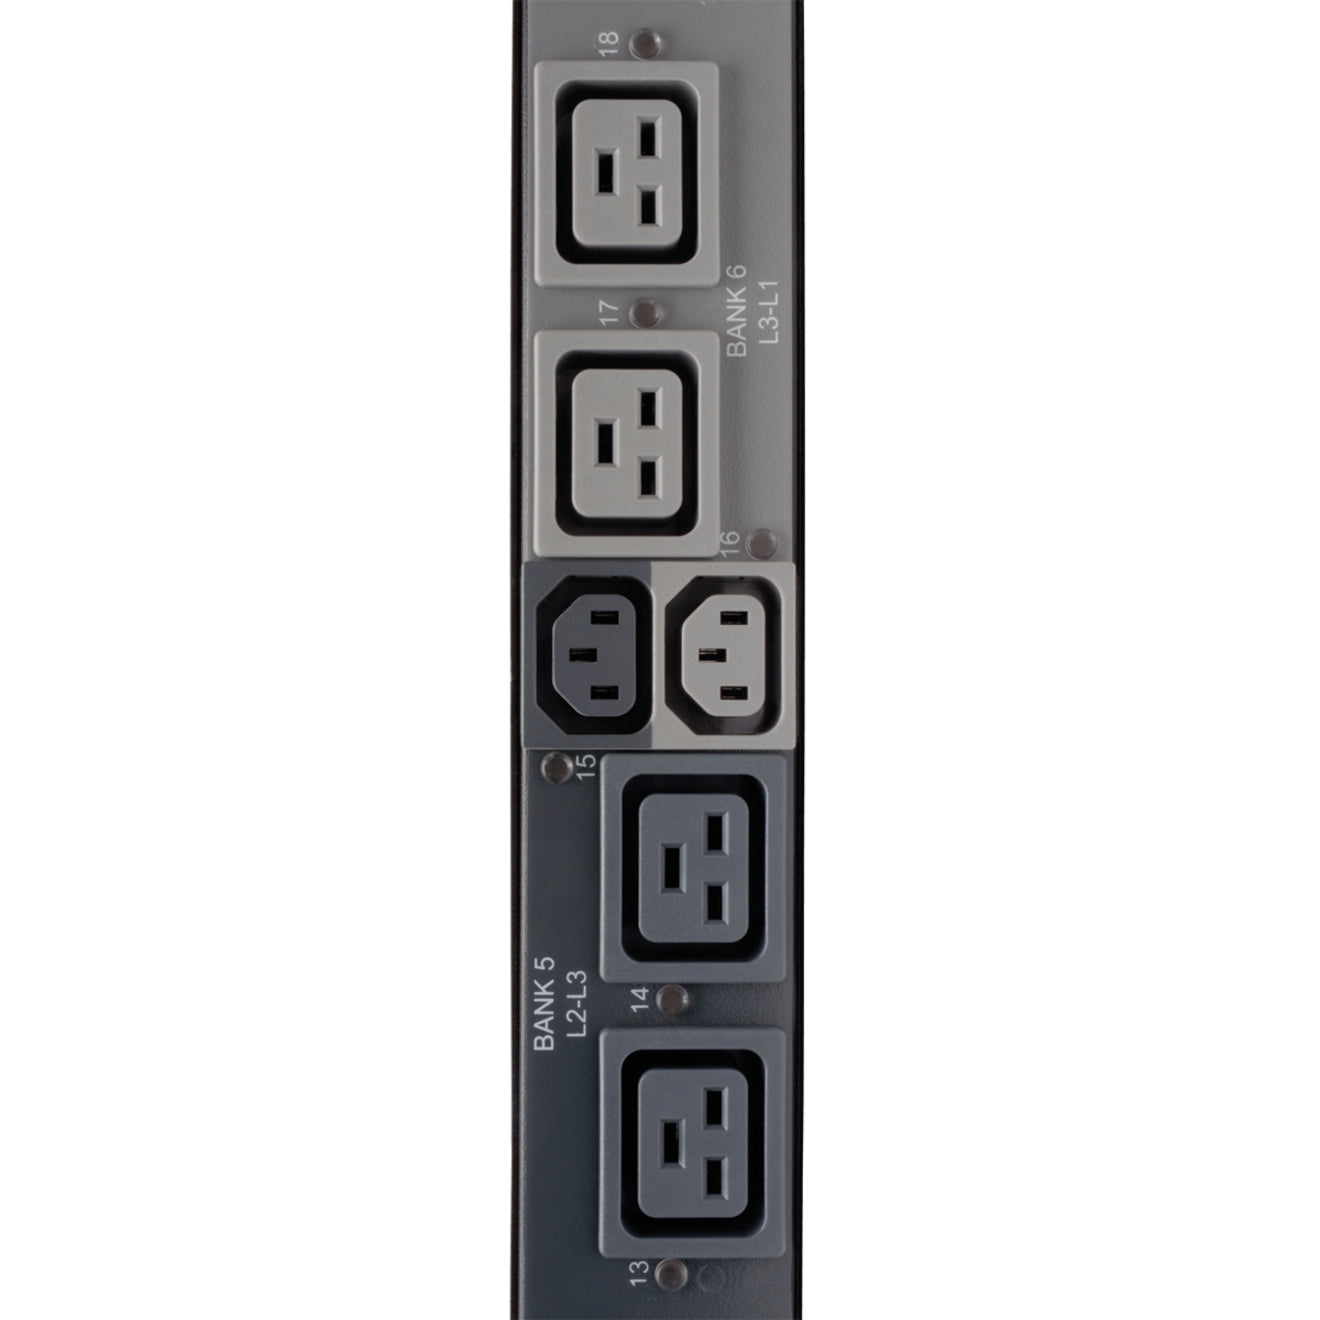 Tripp Lite PDU3EVSR6G60A SWITCHED PDU 16.2KW 3-PHASE, 18-Outlet PDU, Monitored, Overload Protection